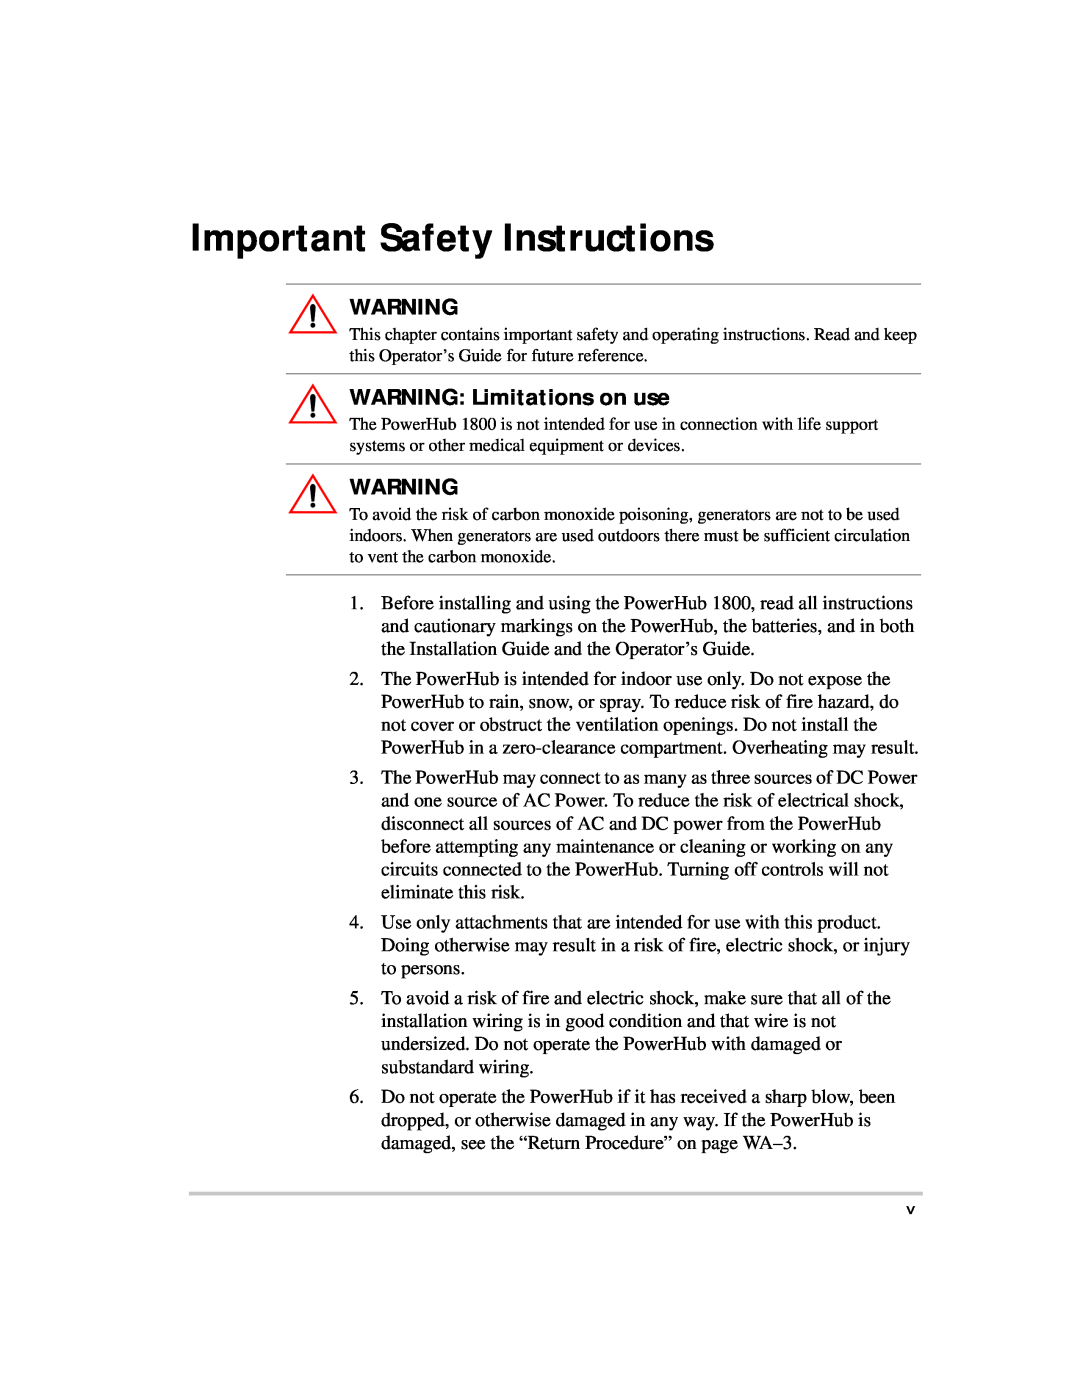 Xantrex Technology PH1800 manual Important Safety Instructions, WARNING Limitations on use 